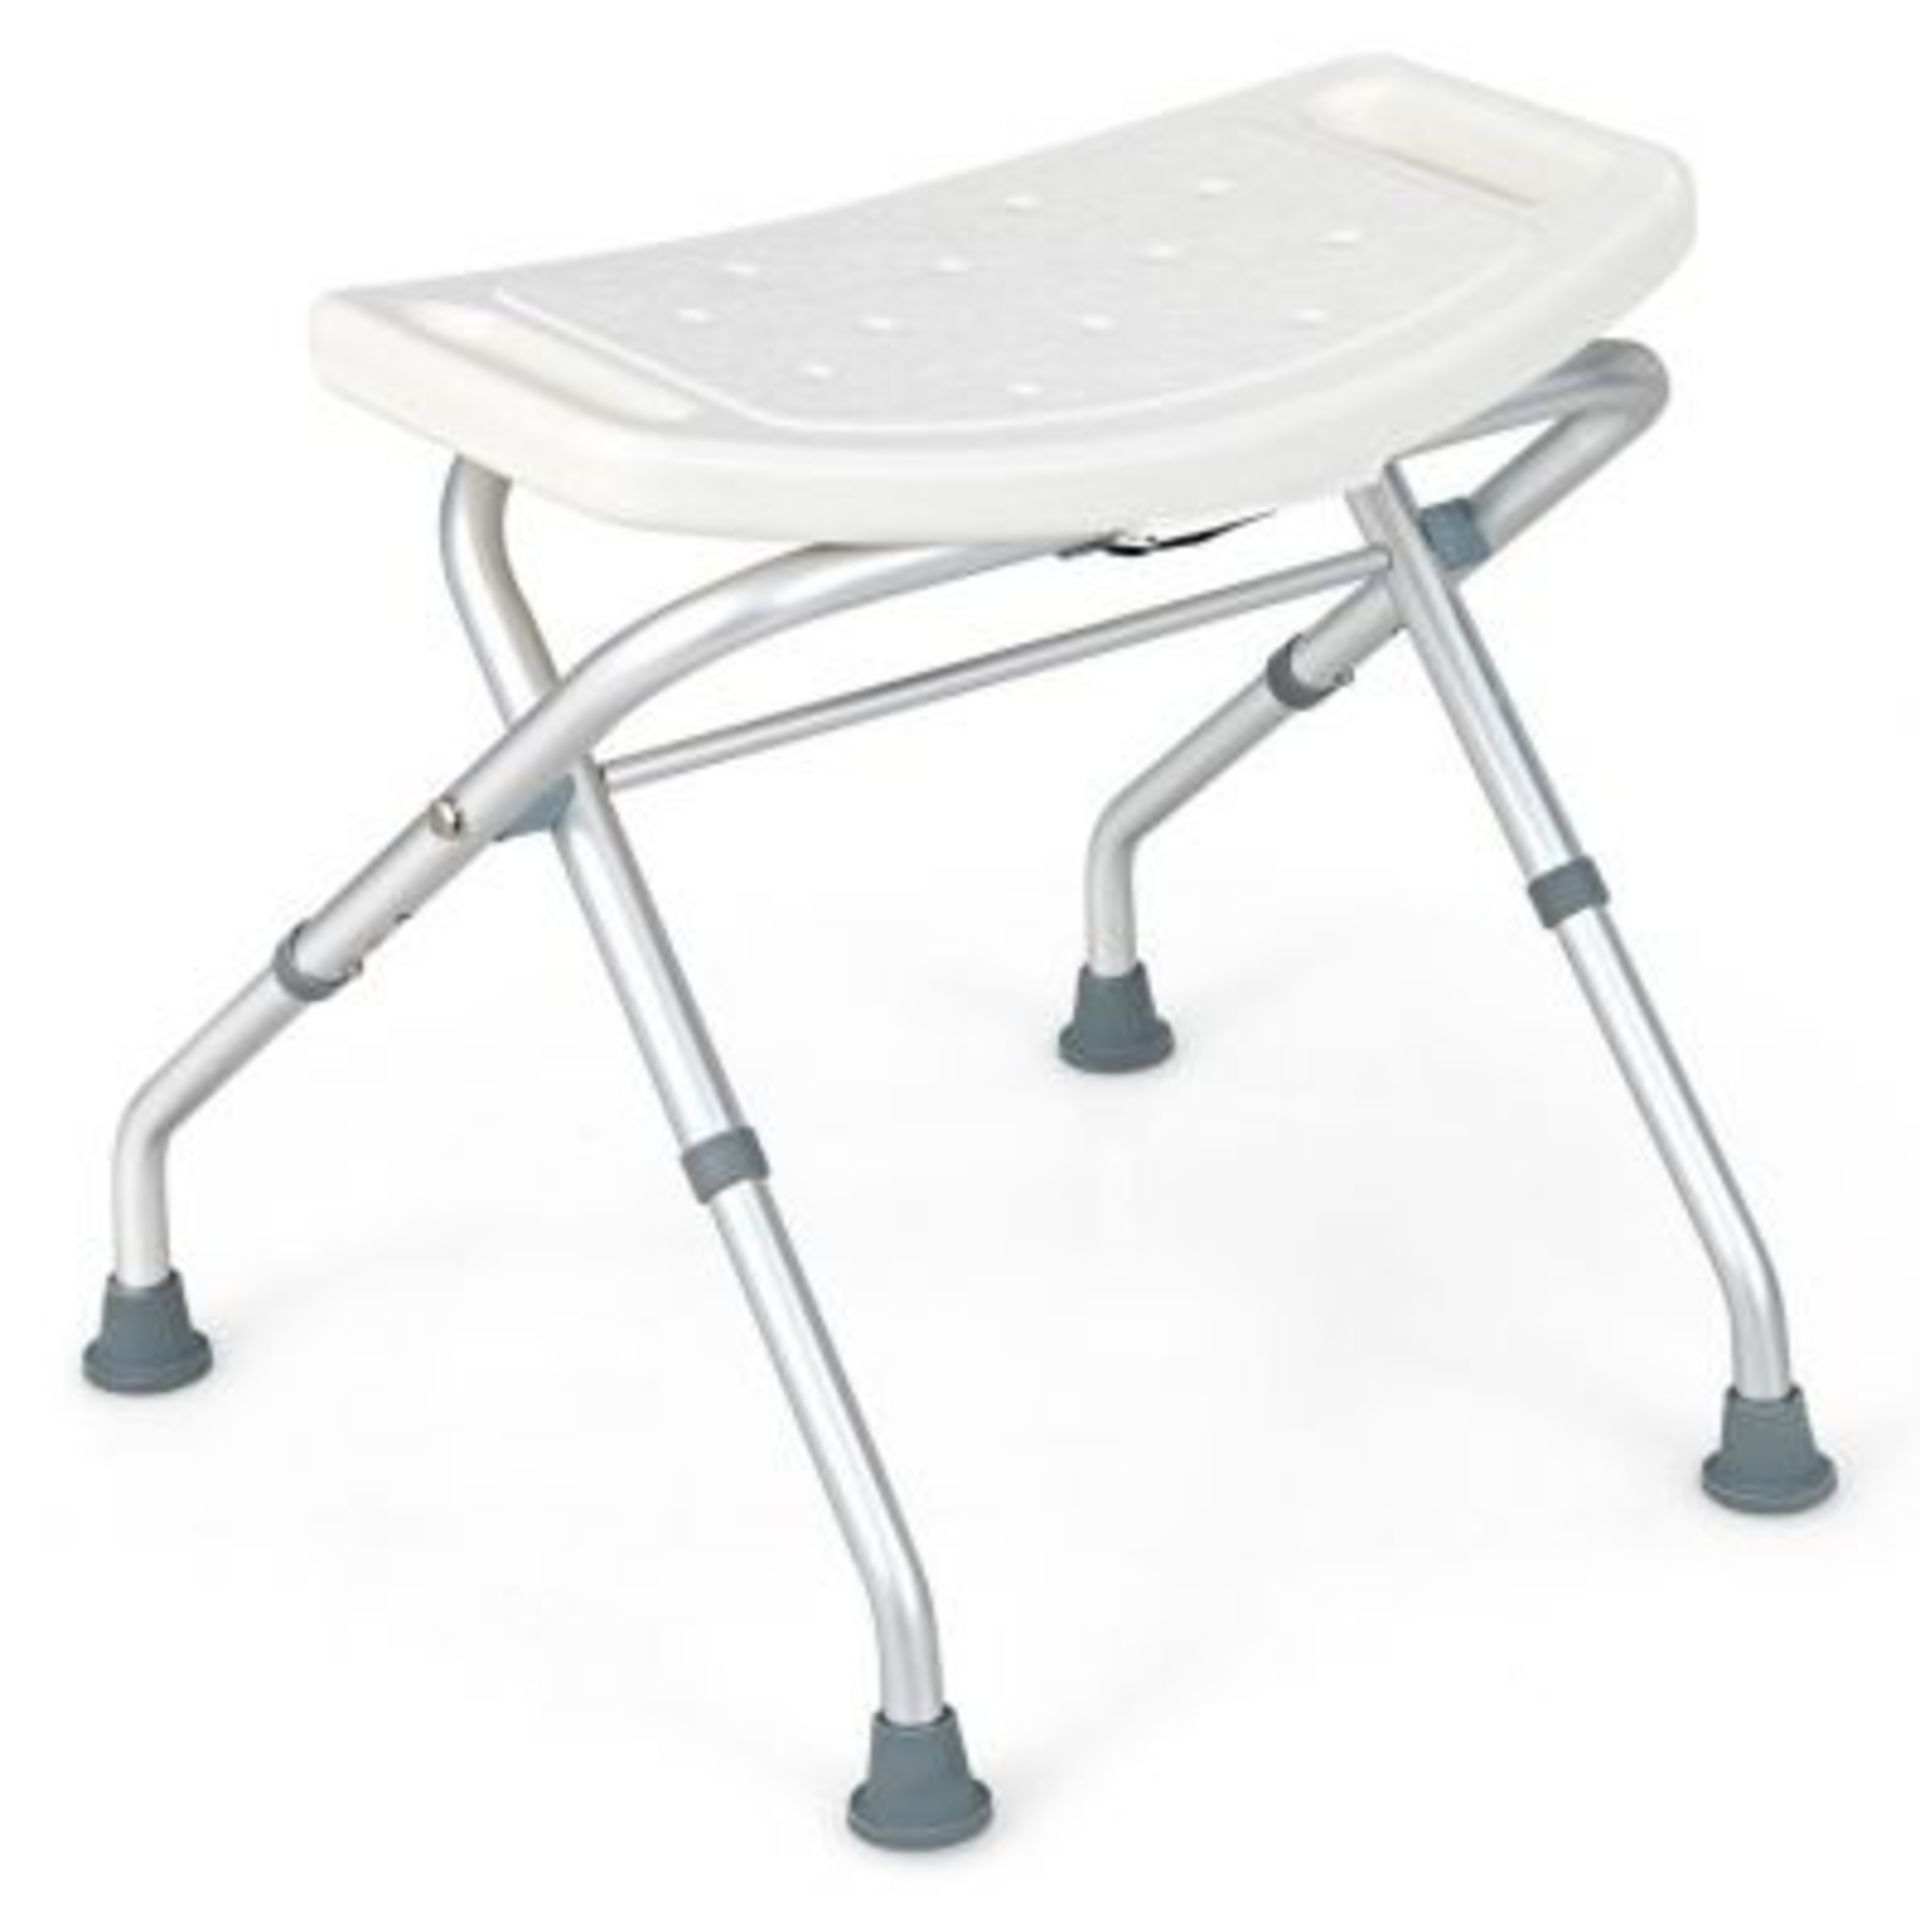 Folding Portable Shower Seat with Adjustable Height for Bathroom - ER54